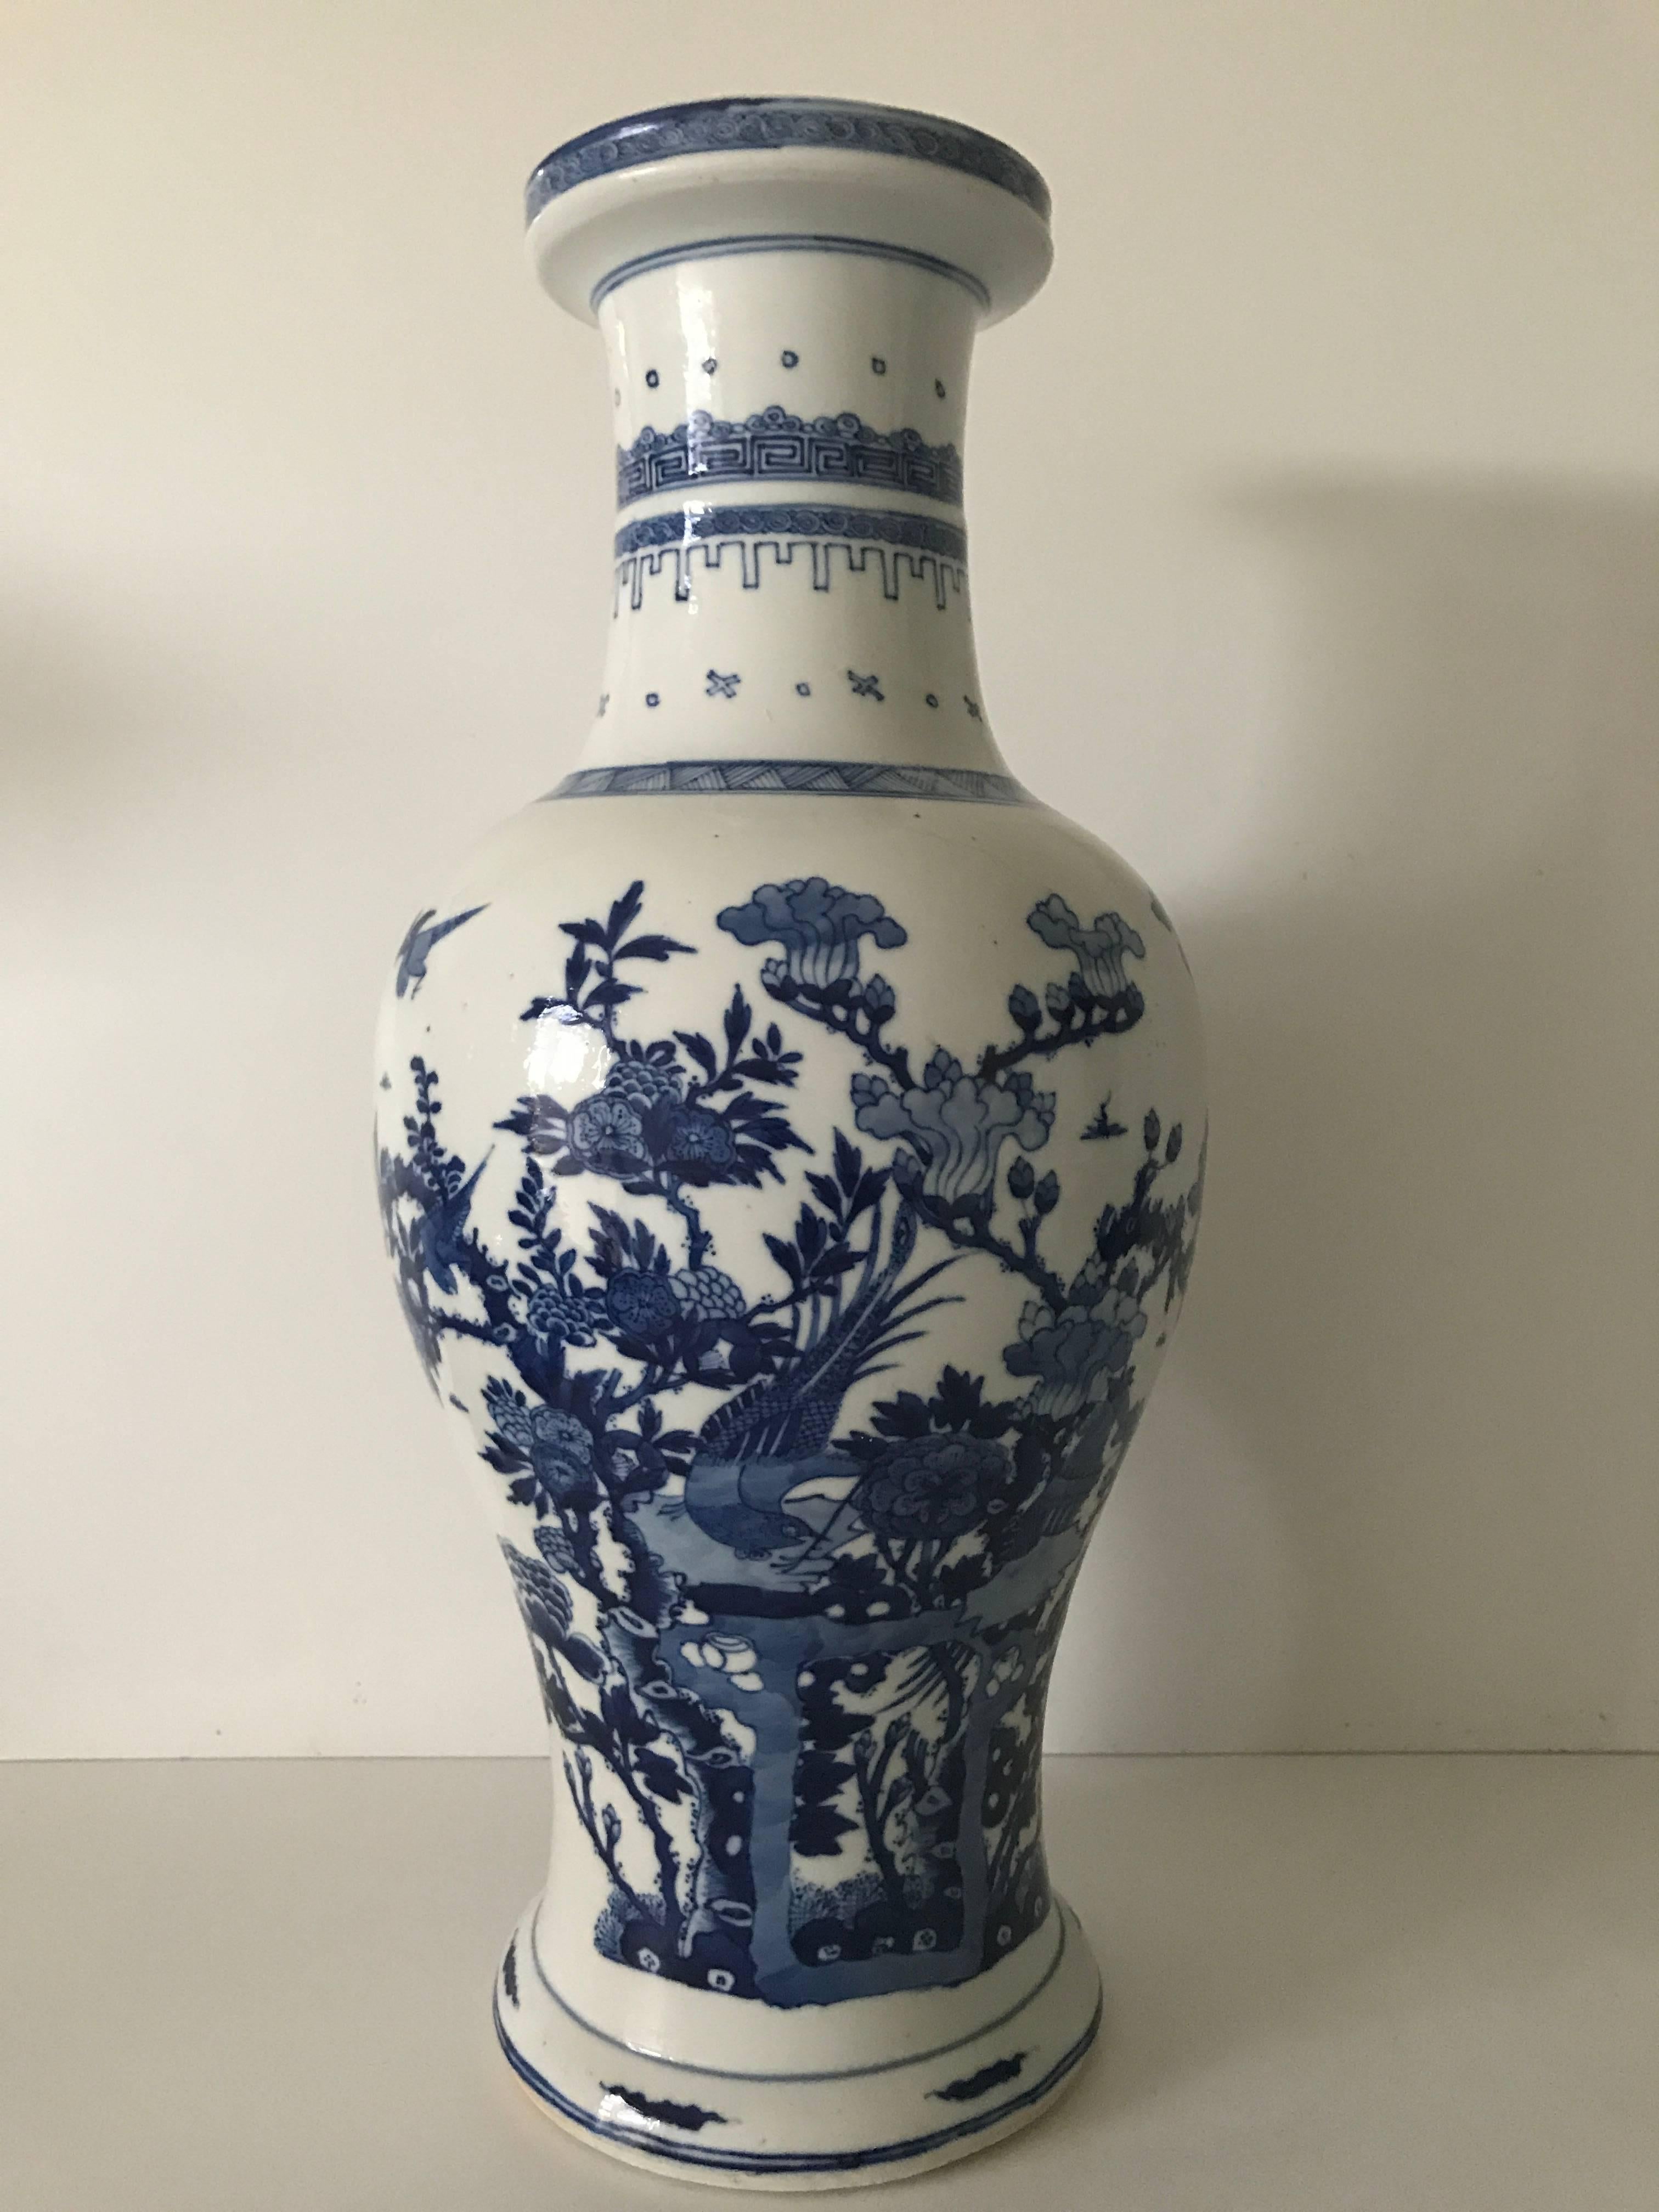 Late 20th century Chinese Guangxu mirror pair Kangxi style porcelain vases.
This beautiful pair of Kangxi style mirror vases were made in the 20th century.
This pair is in a pristine condition and without any damages, cracks or repairs. There are